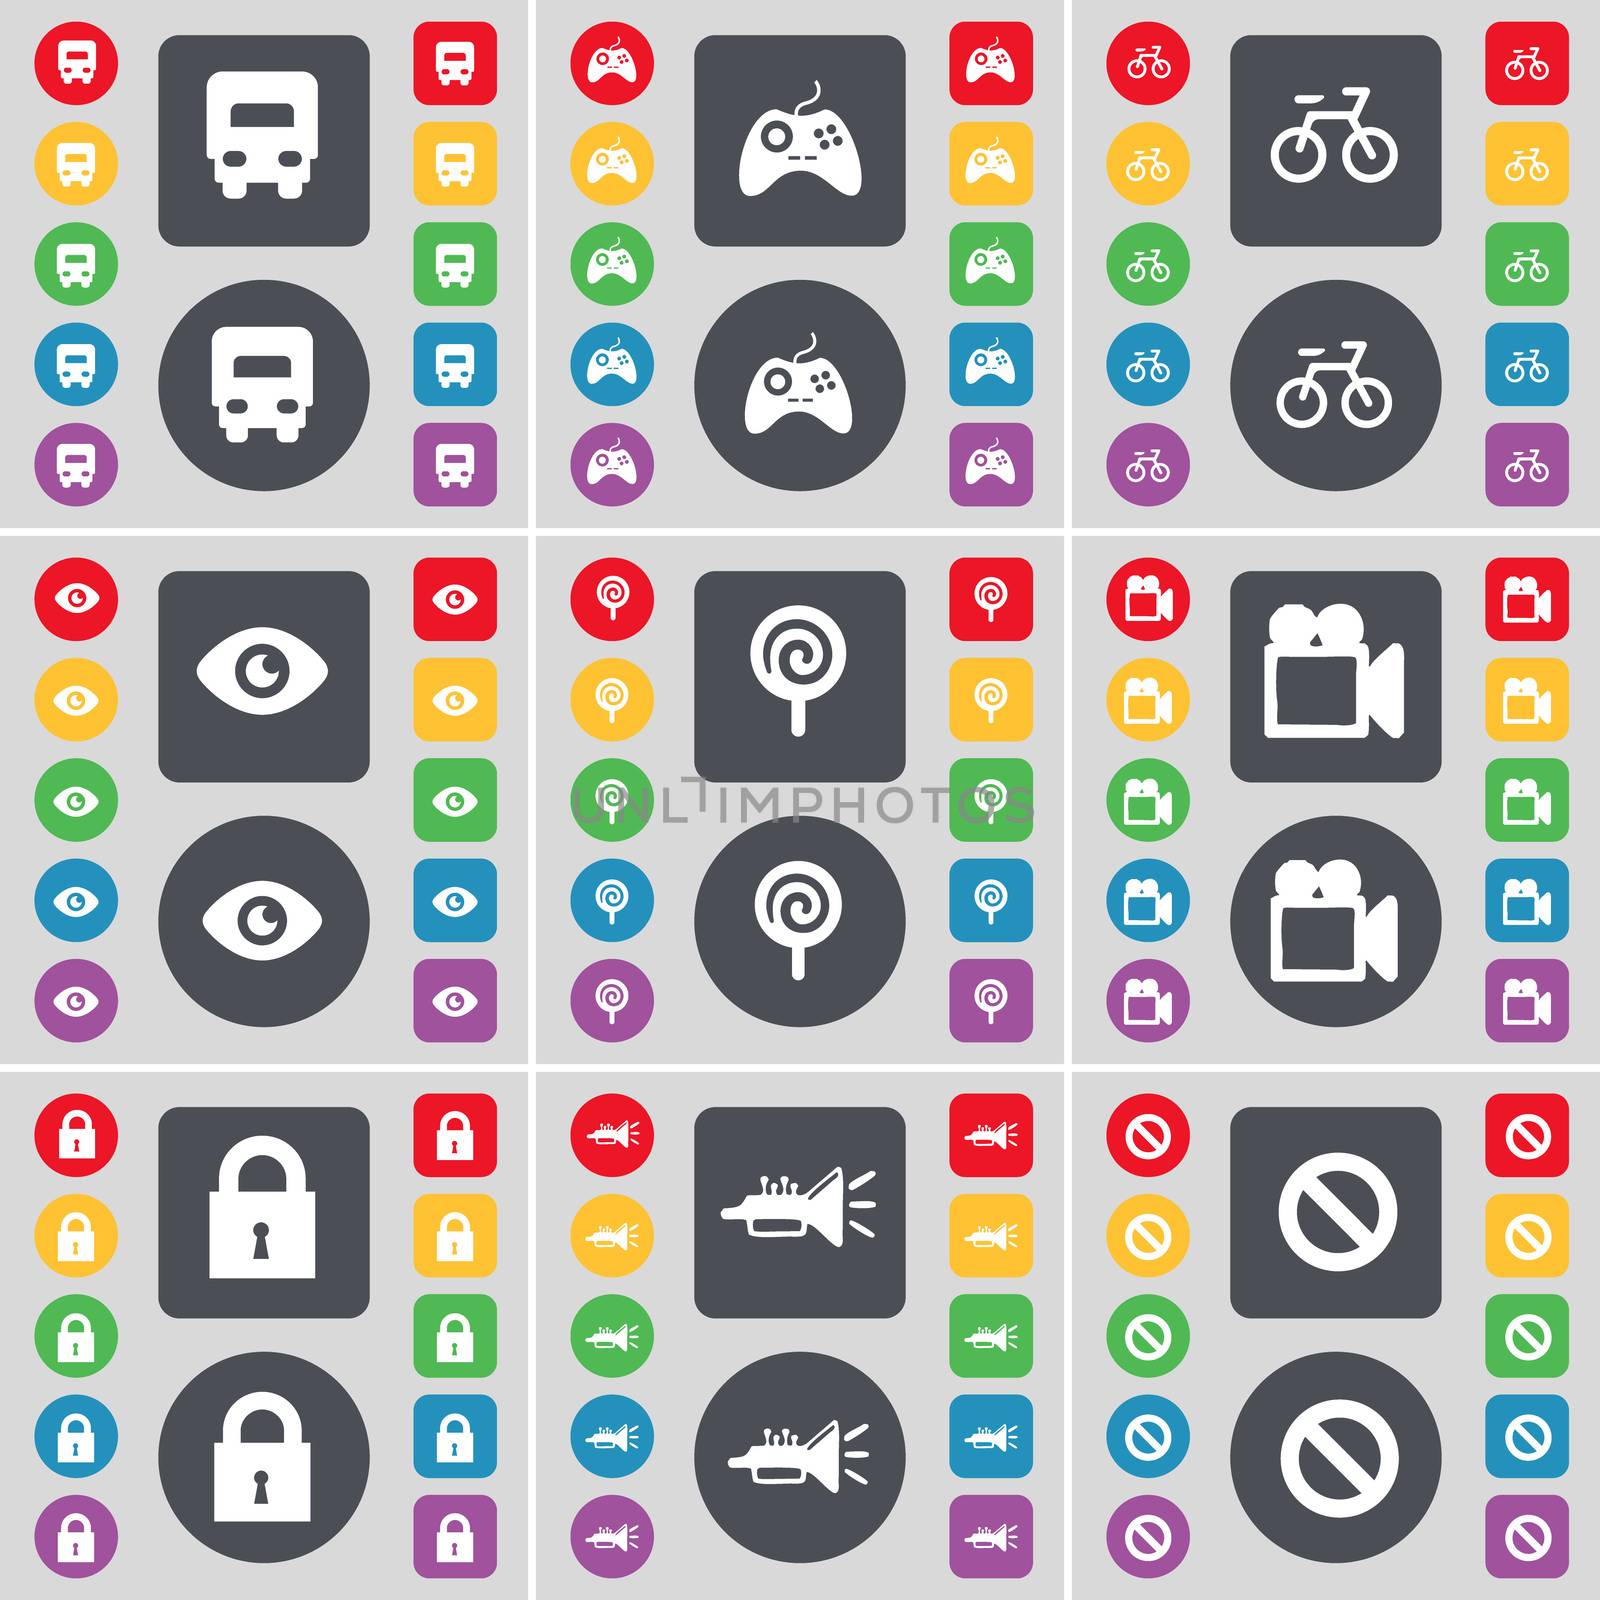 Truck, Gamepad, Bicycle, Vision, Lollipop, Film camera, Lock, Trumped, Stop icon symbol. A large set of flat, colored buttons for your design. illustration